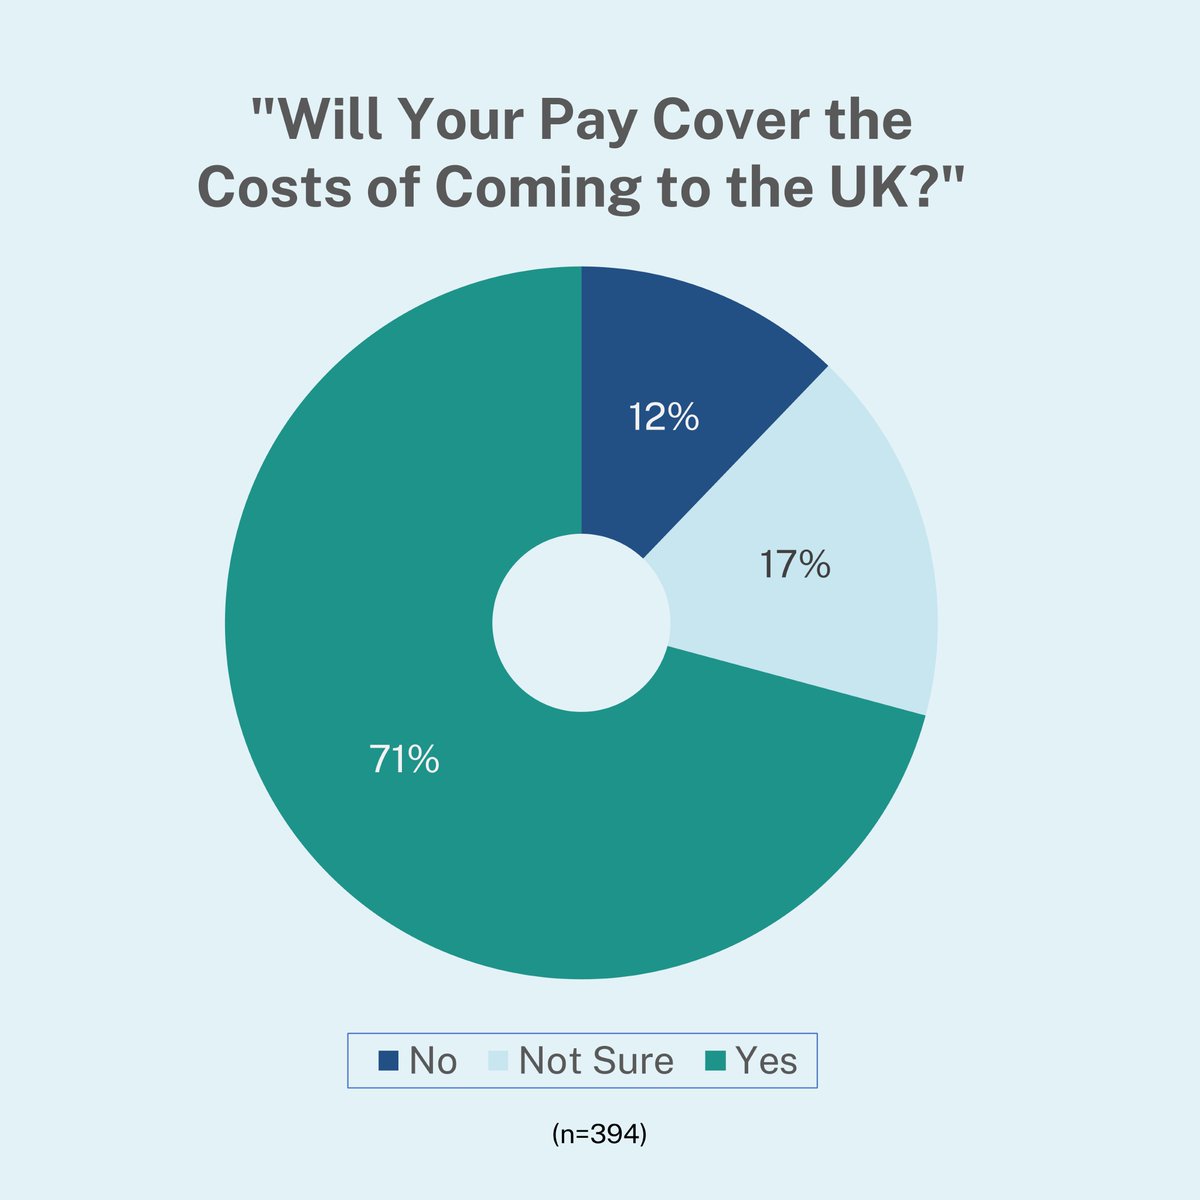 7/10 workers borrow money for migration costs, such as visa fees and flights. However, the report finds that only 71% of people believe they will earn enough in the UK to cover migration related costs. The rest are unsure (17%), or believe that they will not even break even (12%)